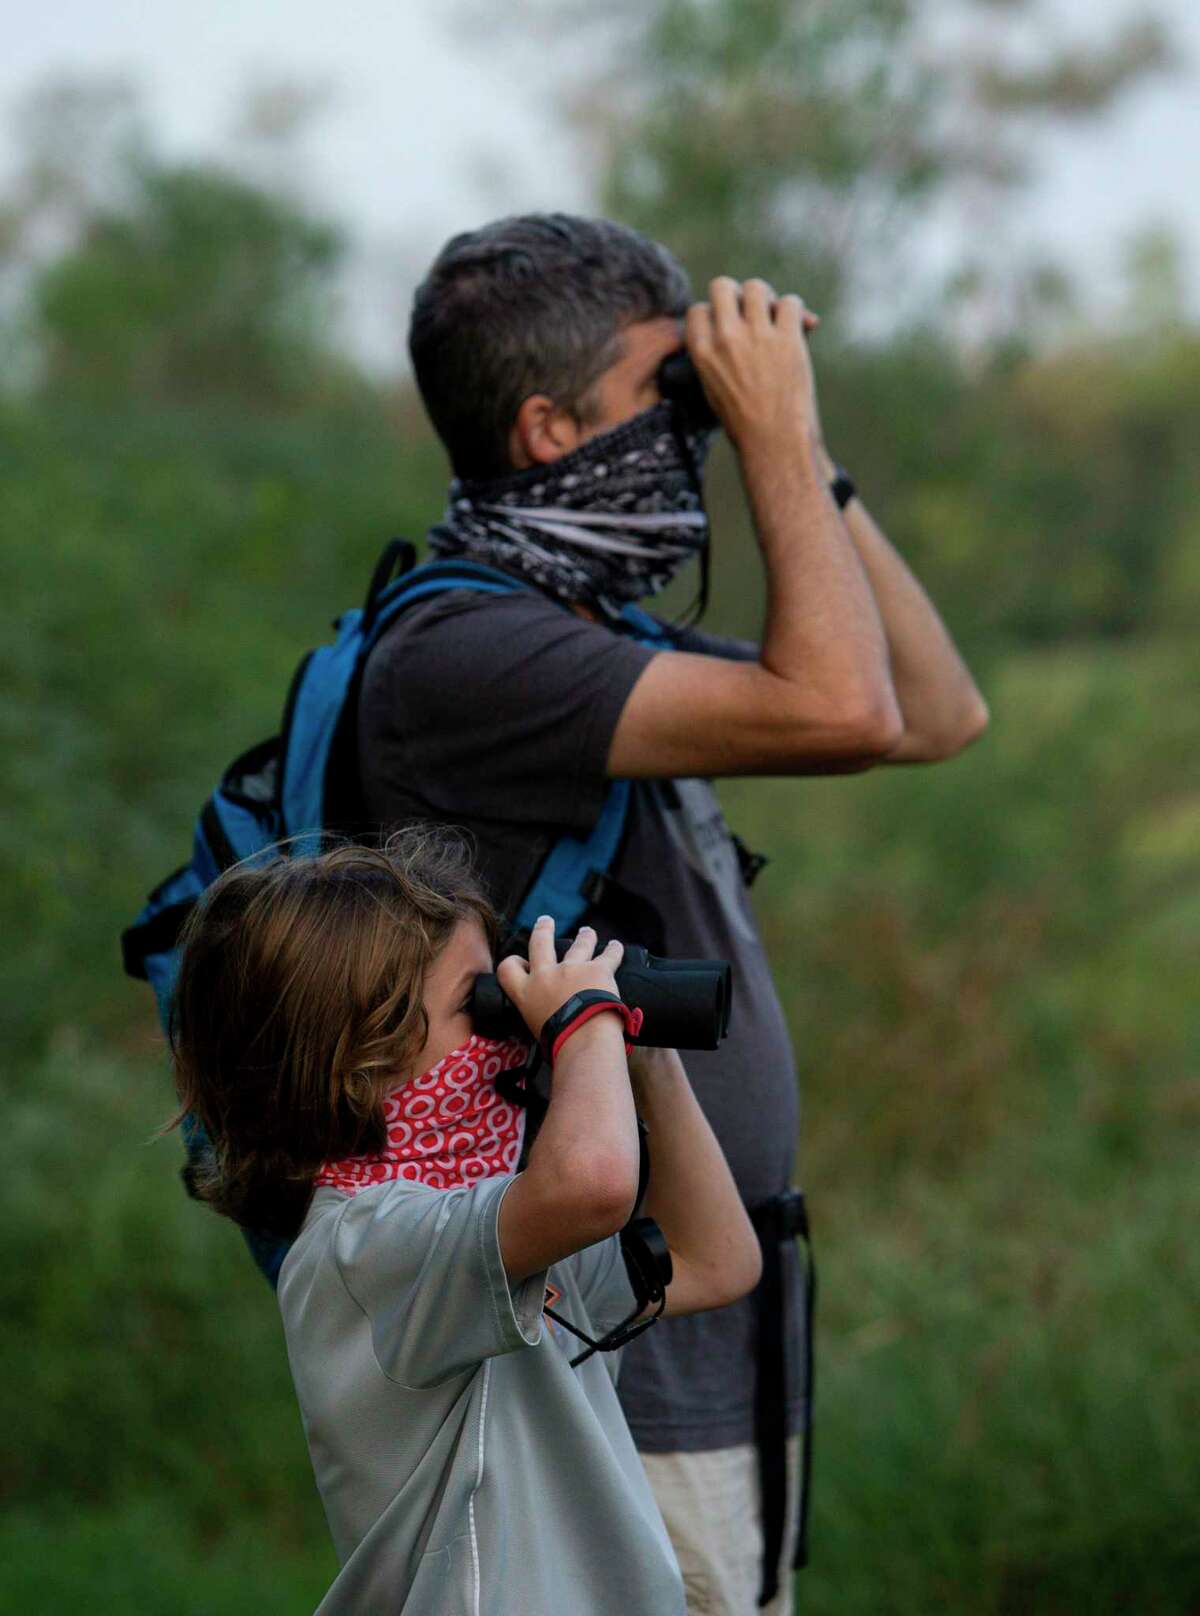 Miles Duboise, 10, and his father, John, use their binoculars to spot birds, during a bird walk at Spring Creek Nature Trails on Saturday, Sept. 19, 2020, in Tomball, Texas. The event kicked off Houston Bird Week.